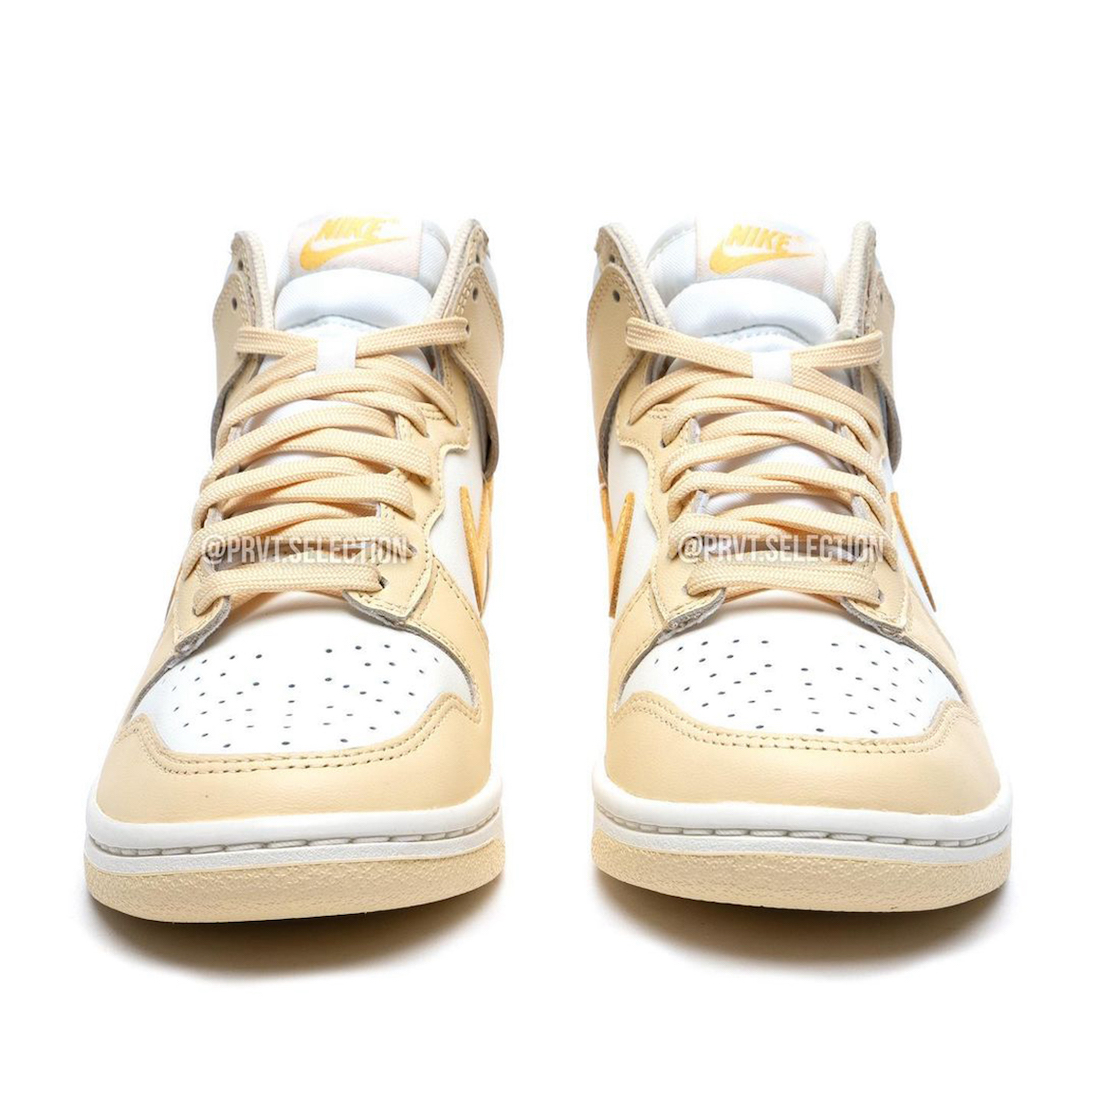 Nike Dunk High Pale Vanilla Topaz Gold Sail DD1869-201 Release Date Front